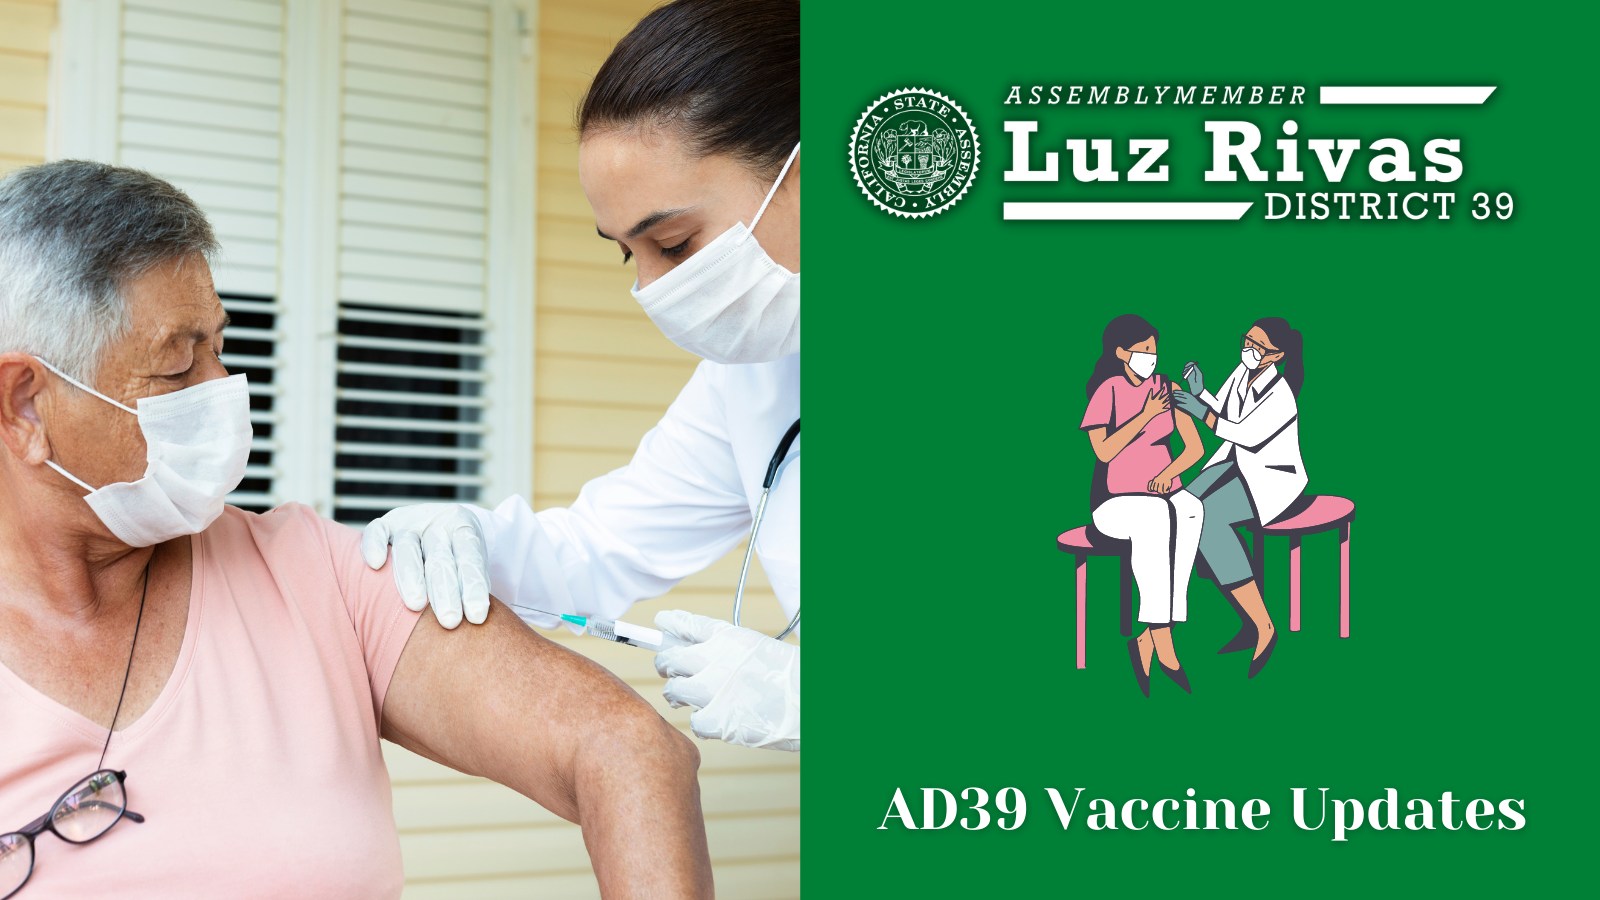 AD 39 Community Hits an 80% Vaccination Rate